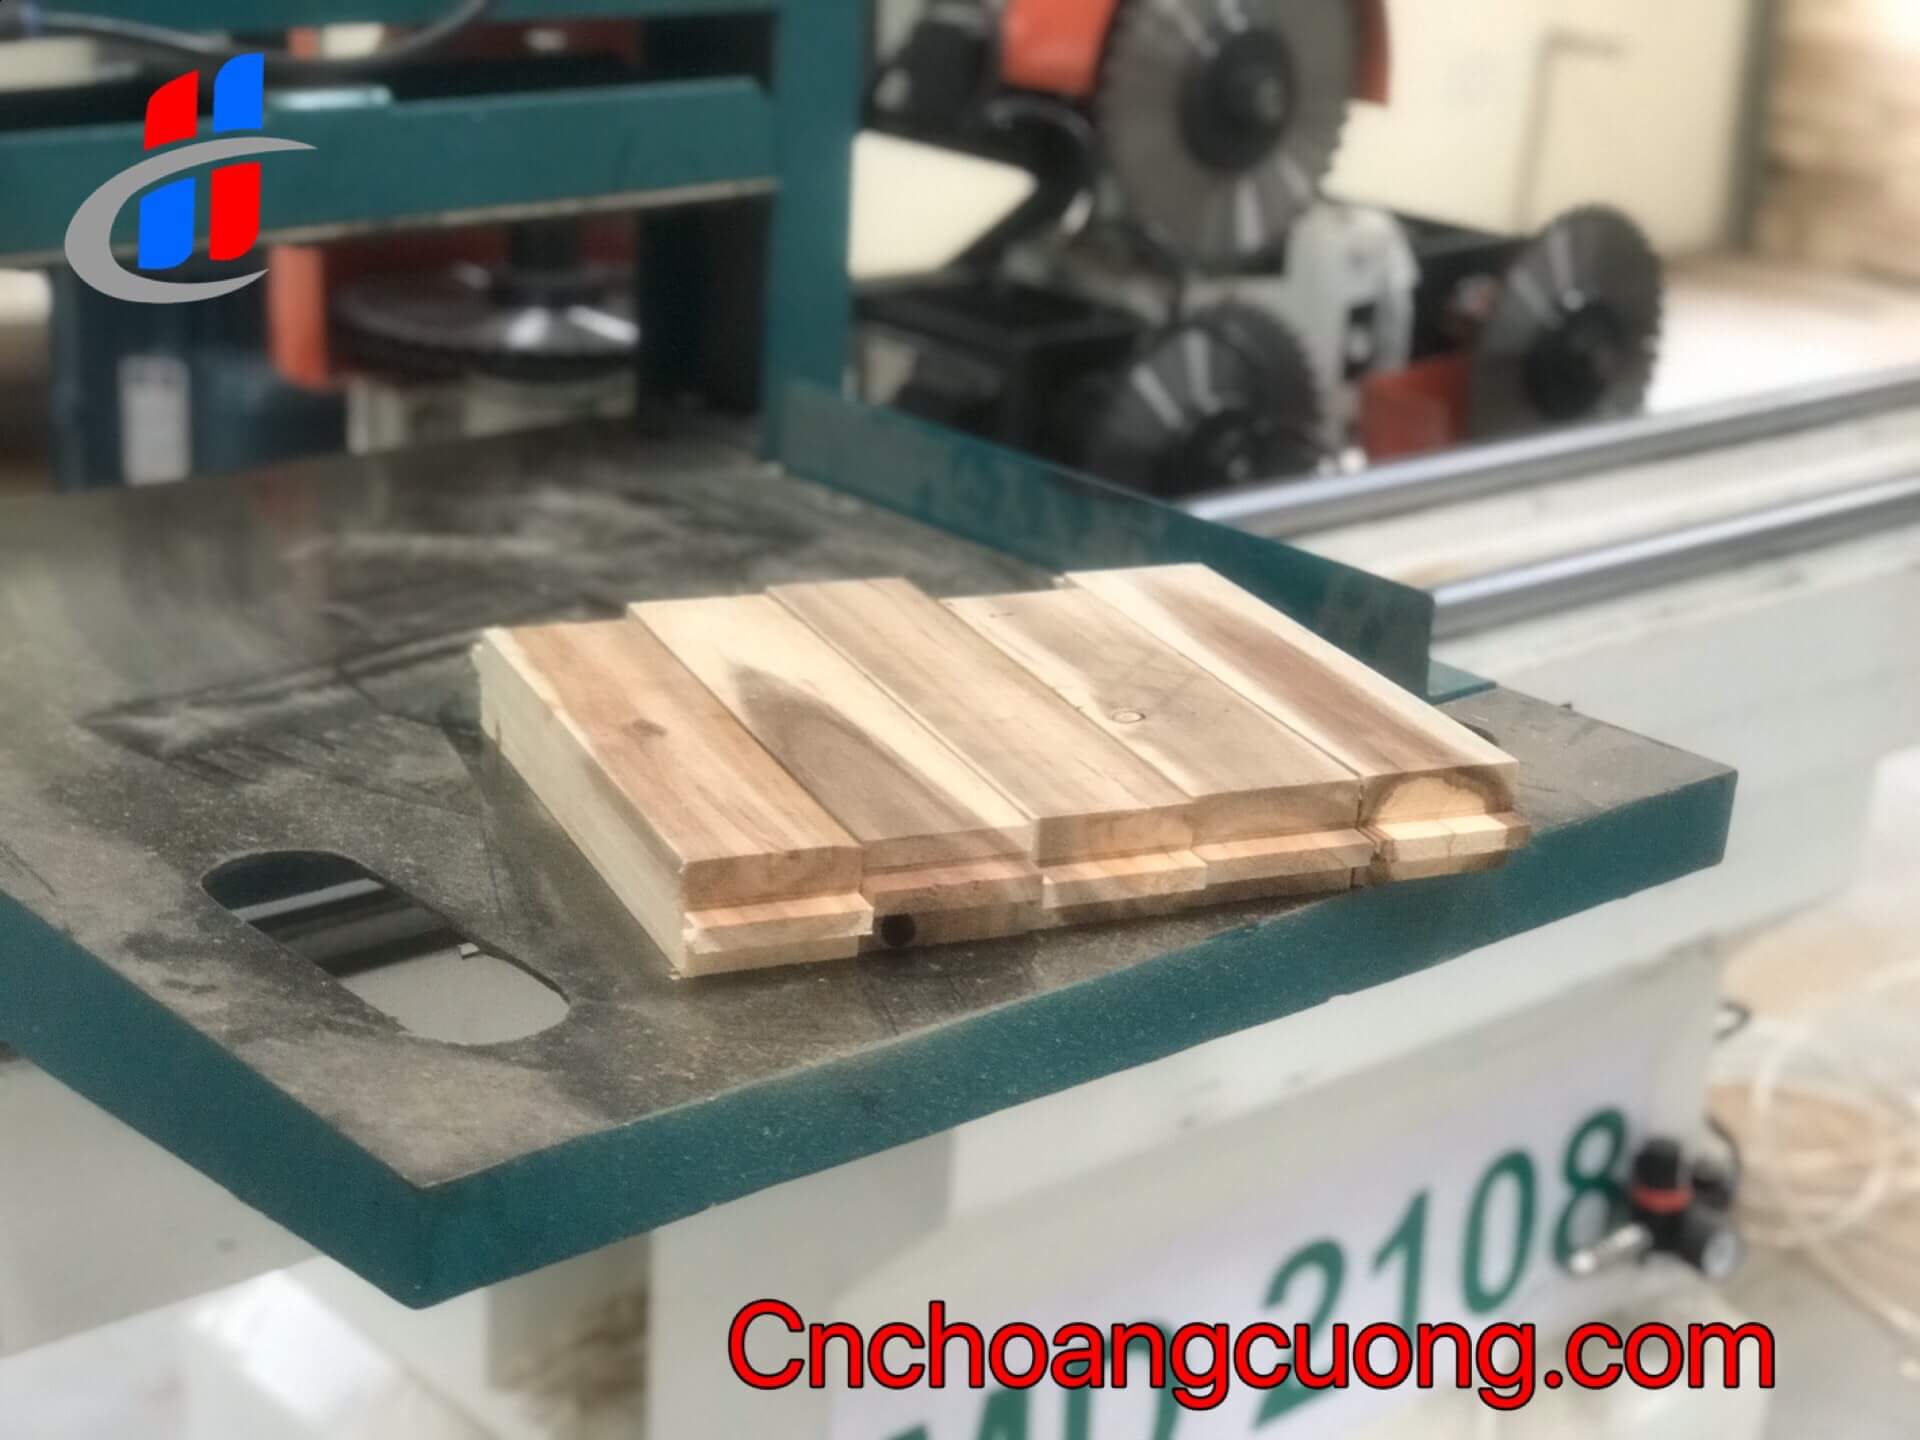 https://cnchoangcuong.com/?post_type=product&p=1454&preview=true